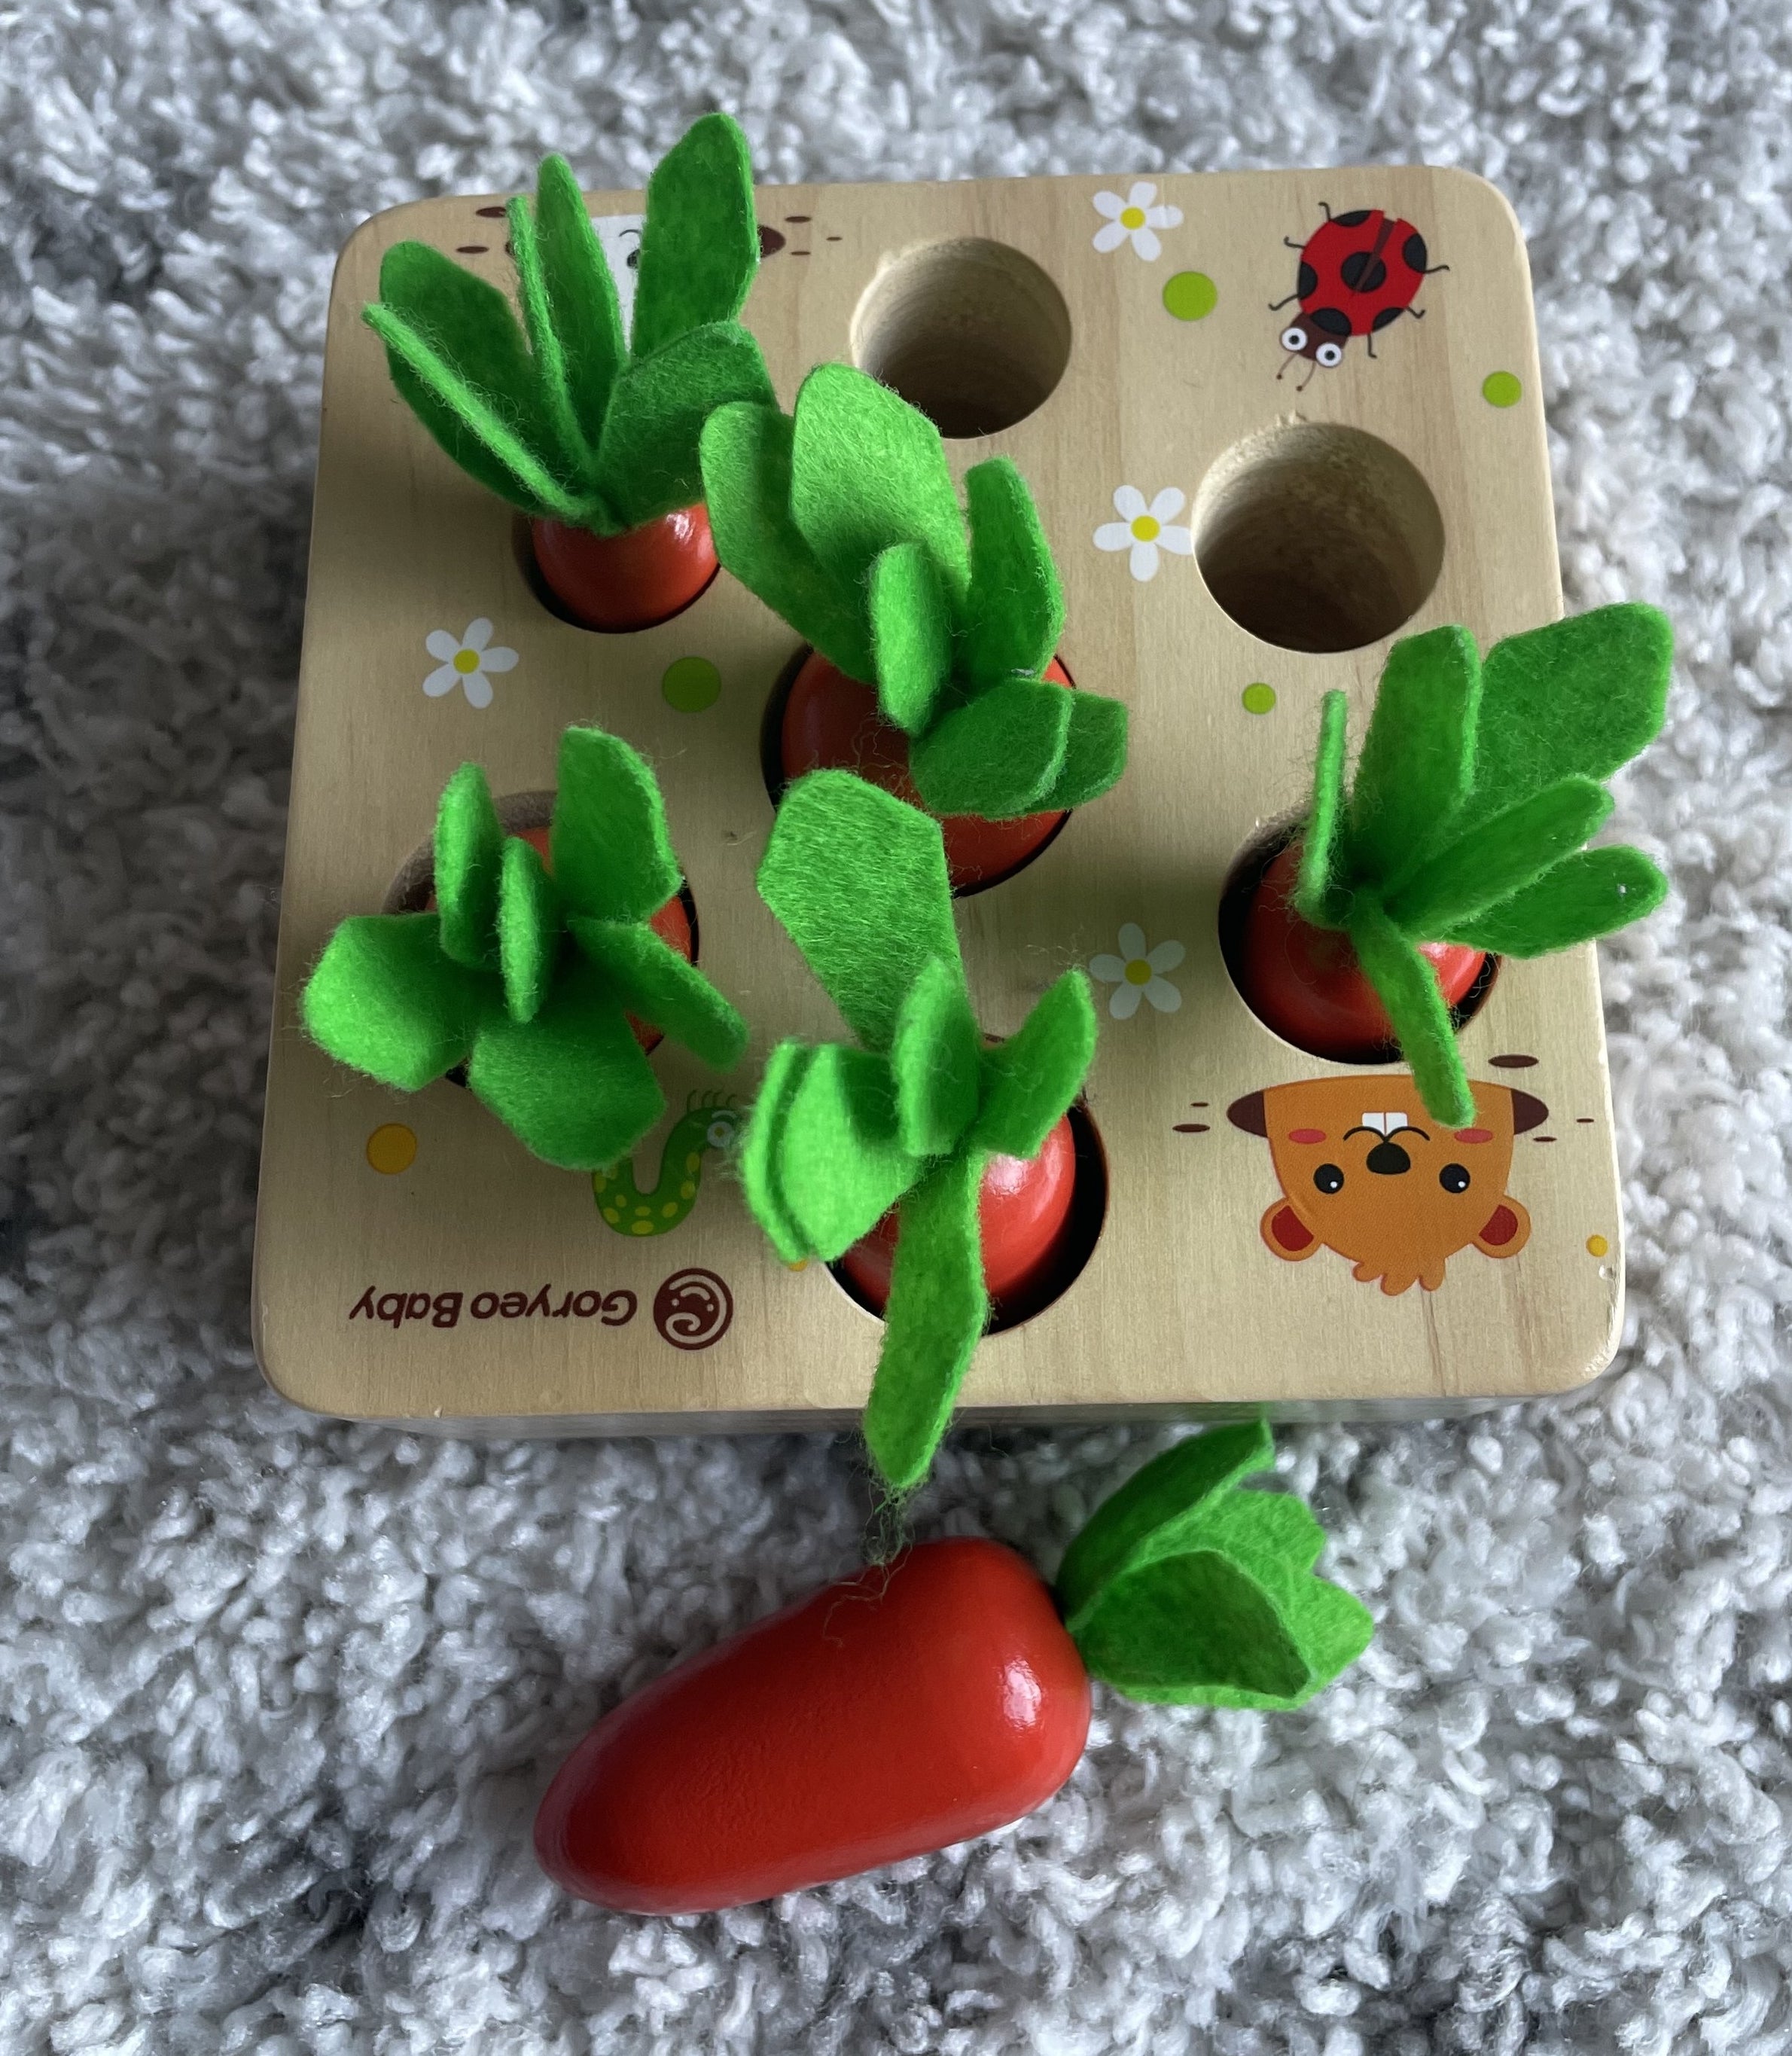 Photo of the wooden block with holes surrounded by toy carrots